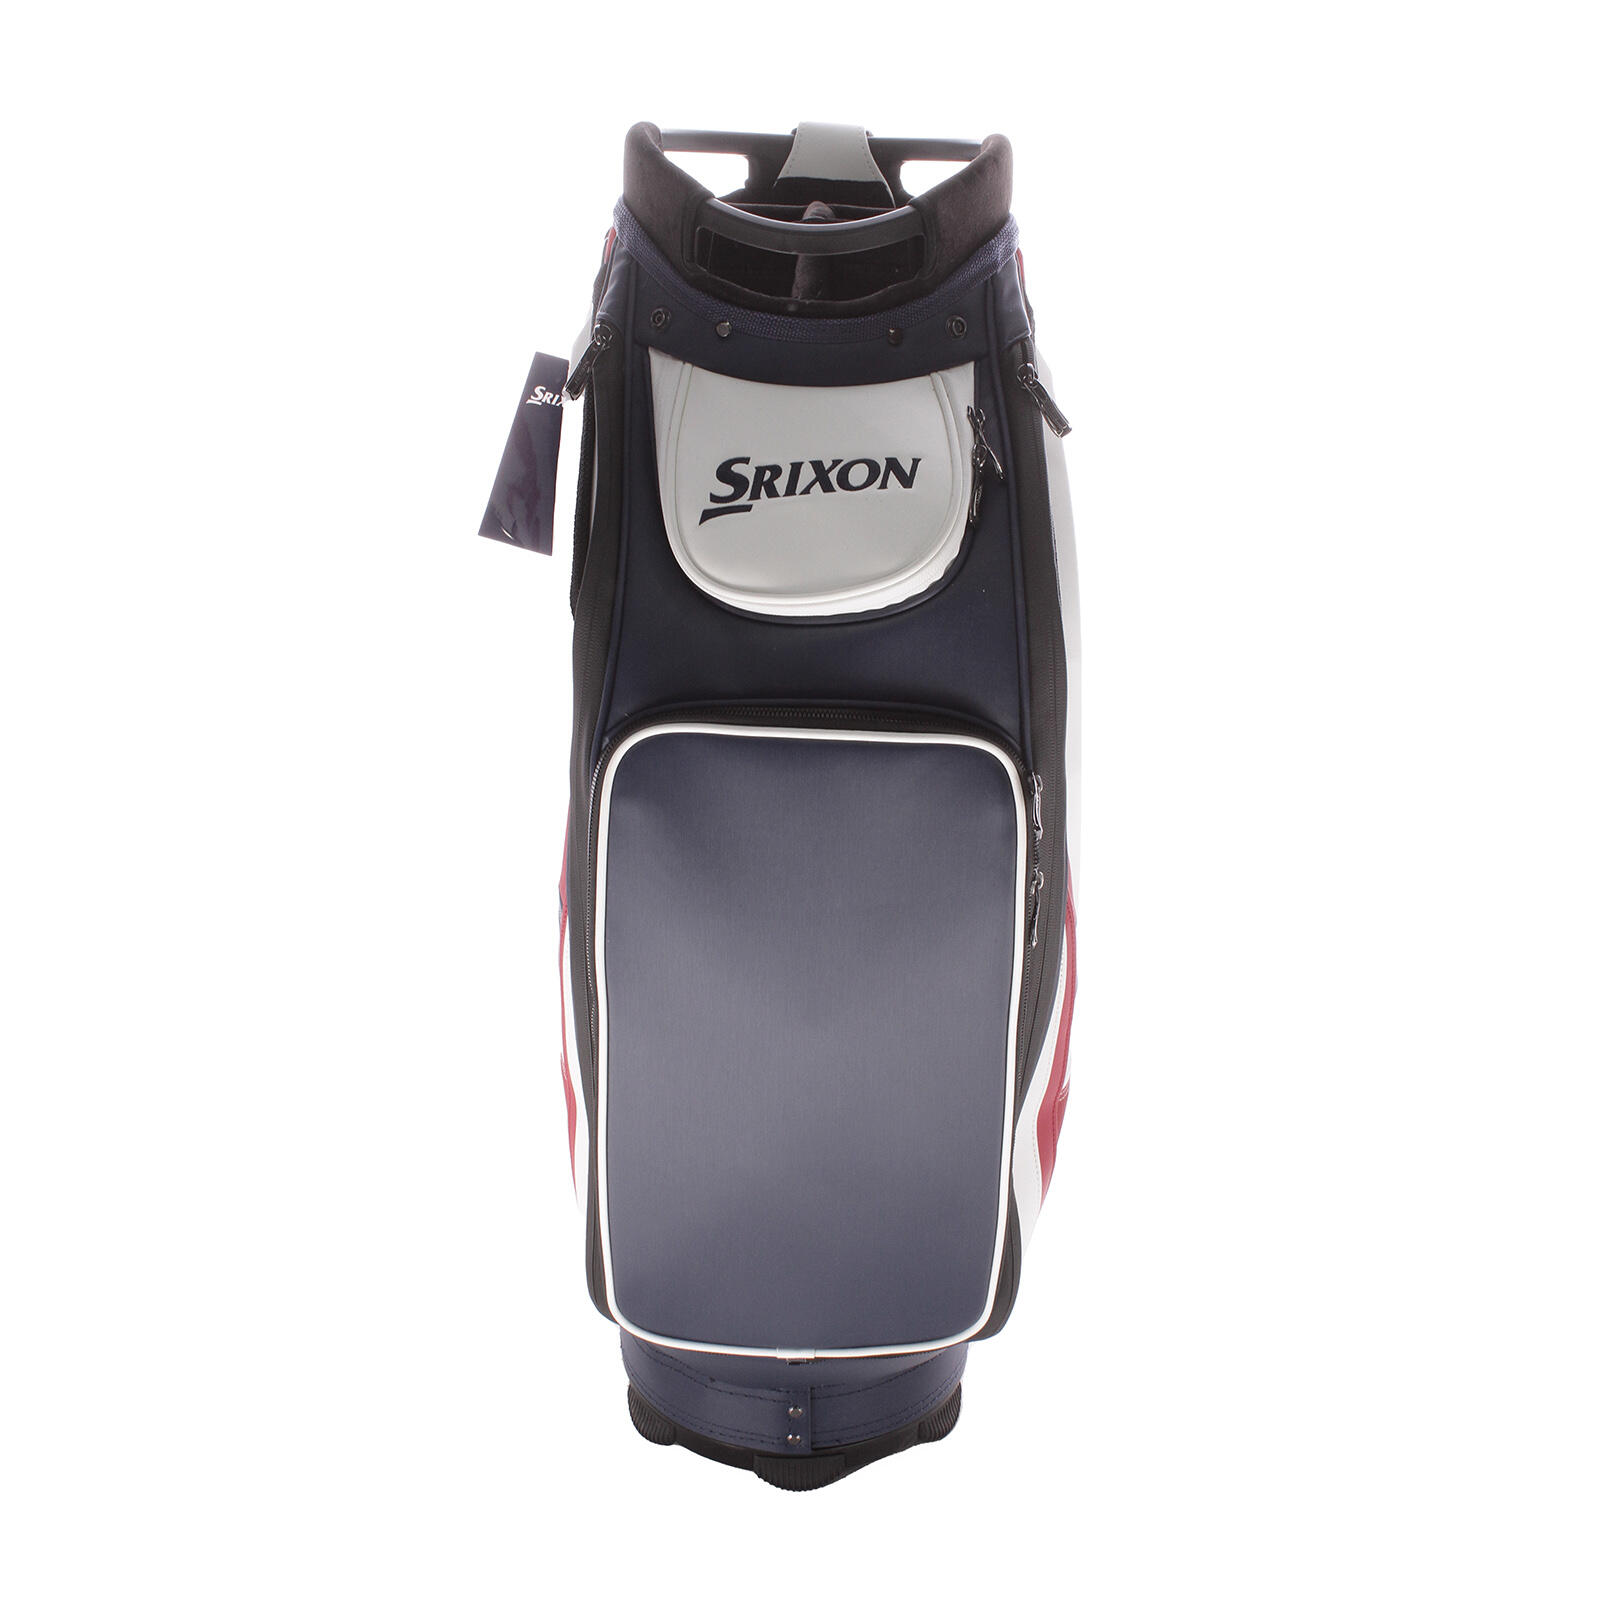 USED - Srixon Staff Tour Bag with 5 Way Divider Top and Single Strap - GRADE B 4/5